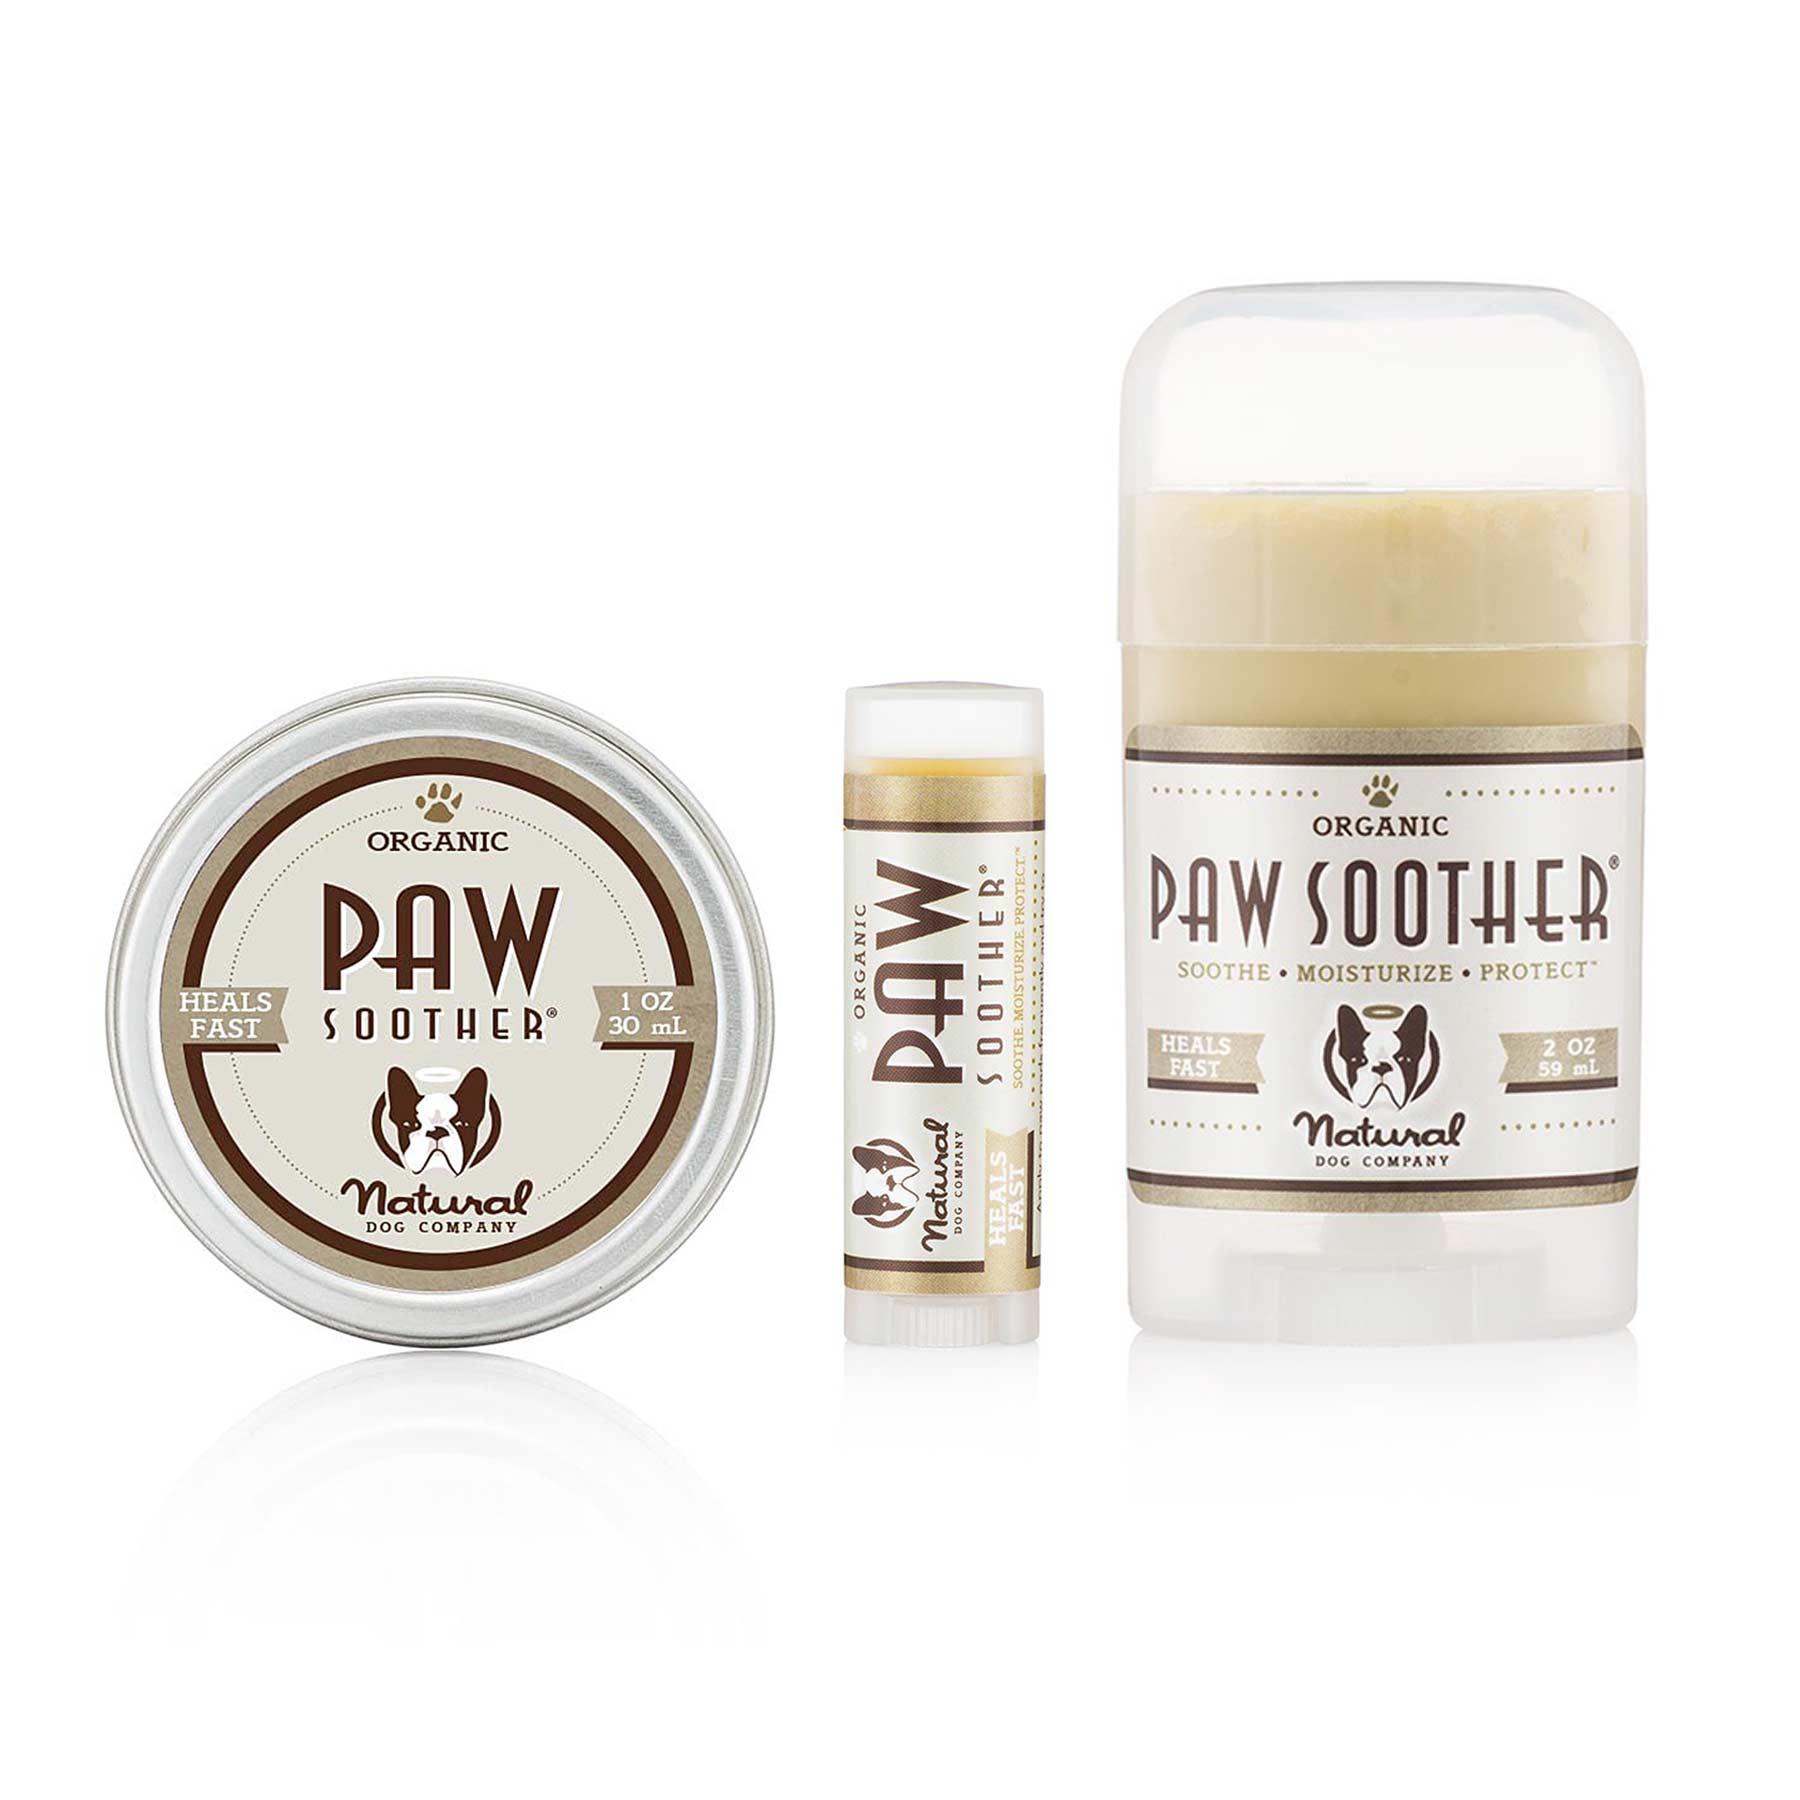 Natural Dog Company Paw Soother Organic Healing Balm